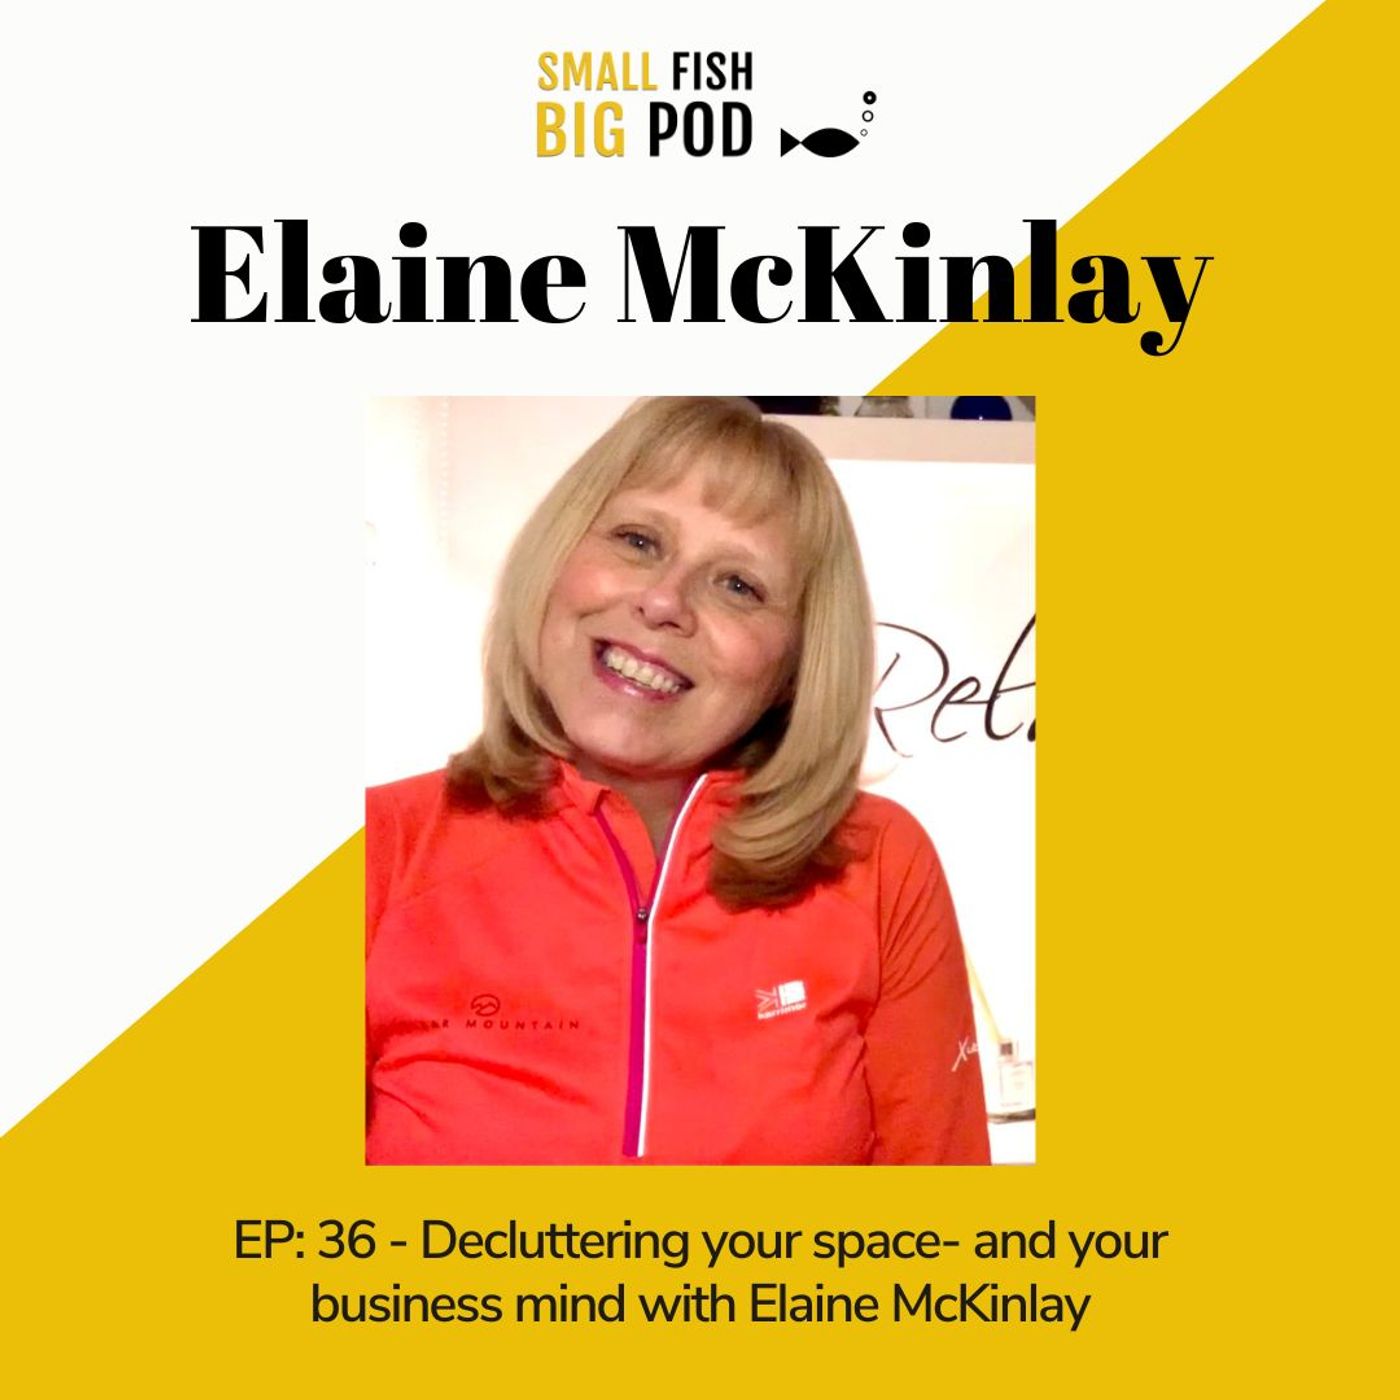 EP36: Decluttering your space- and your business mind- with Elaine McKinlay